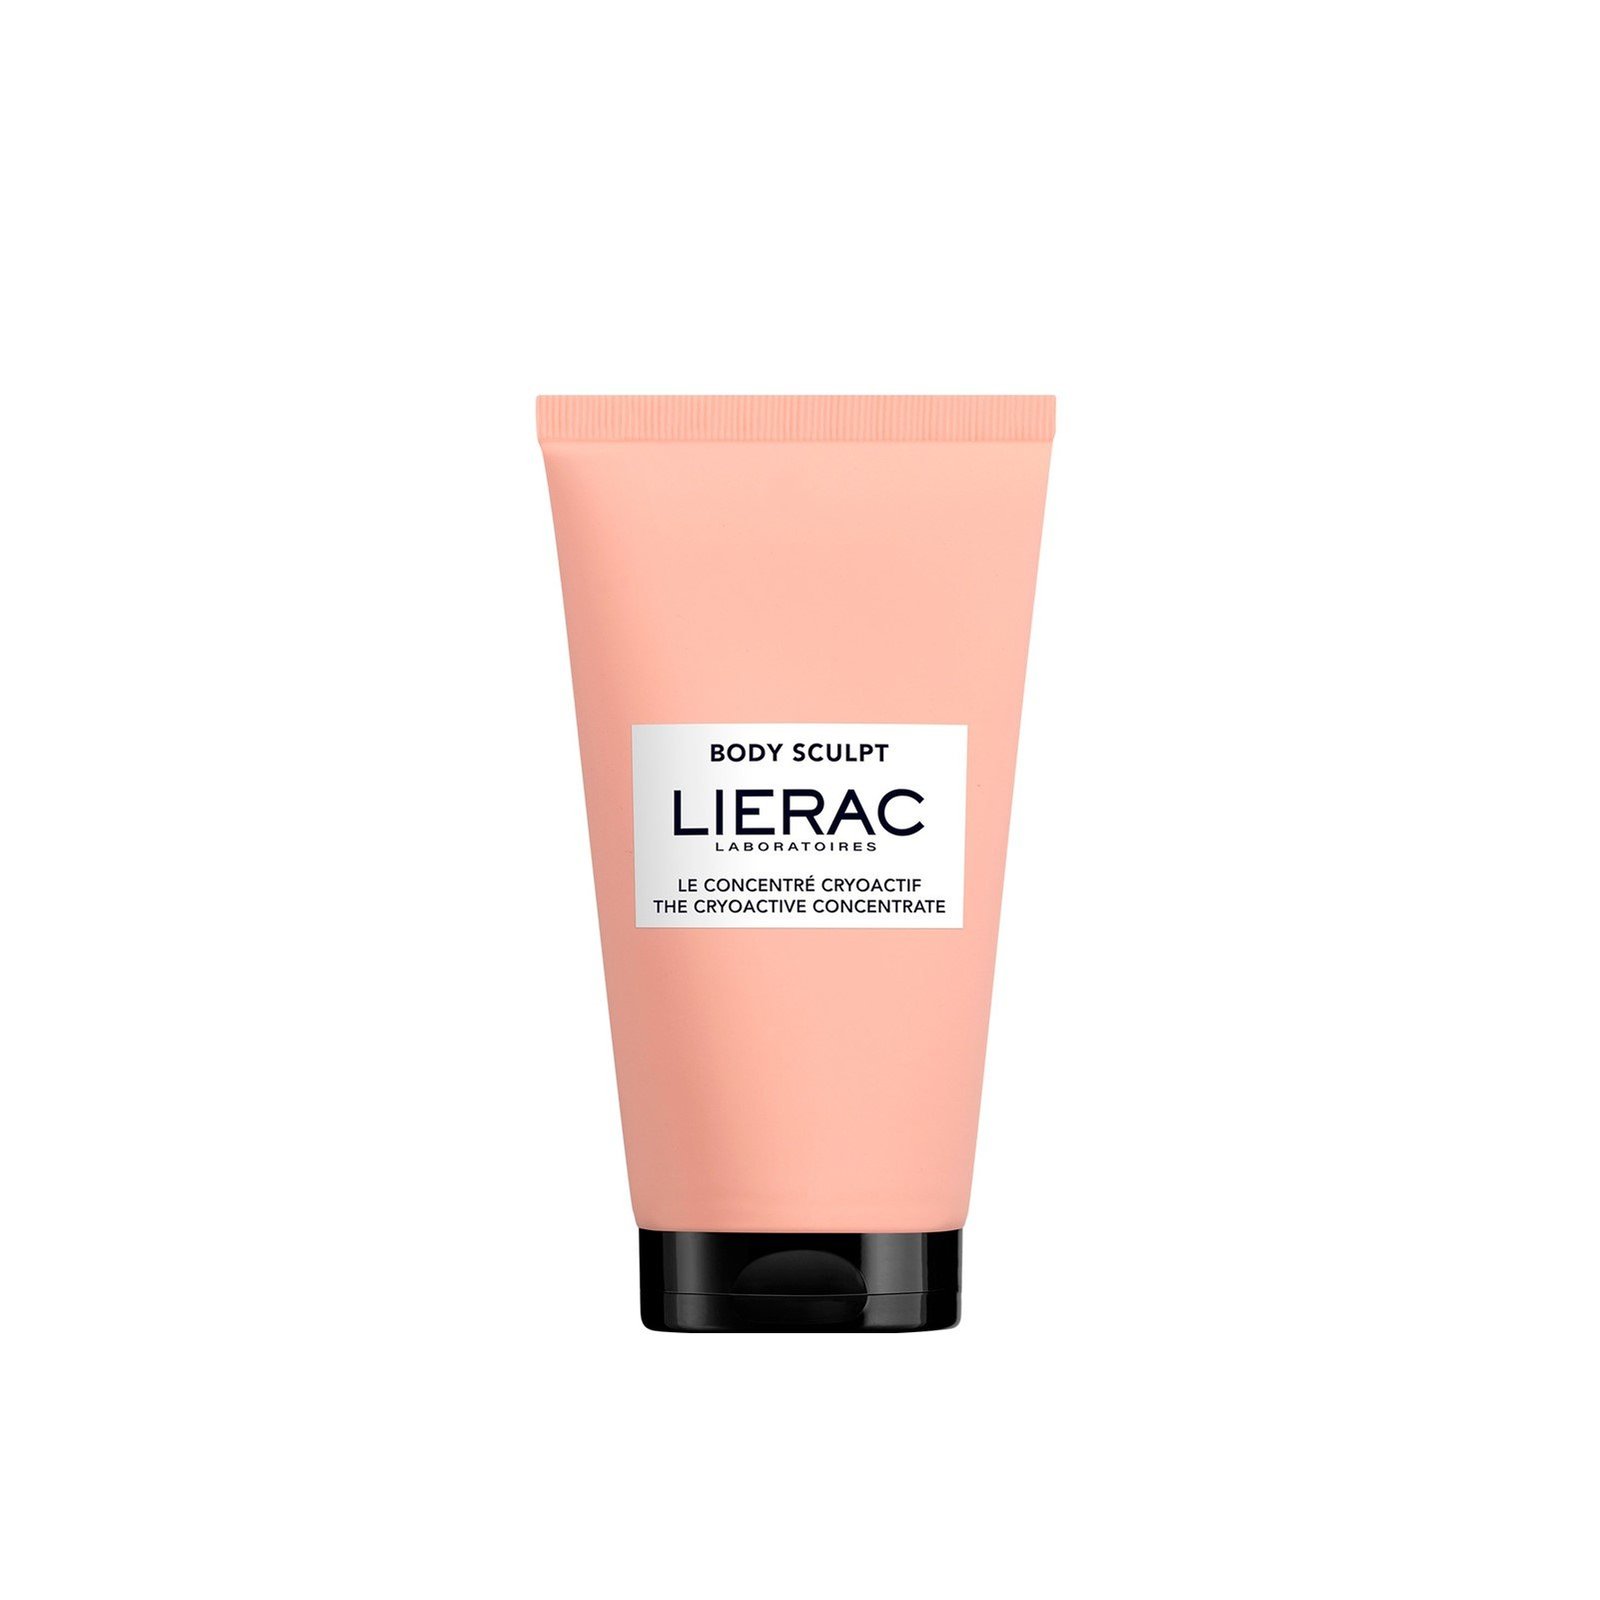 Lierac Body Sculpt The Cryoactive Concentrate 150ml (5.07floz)